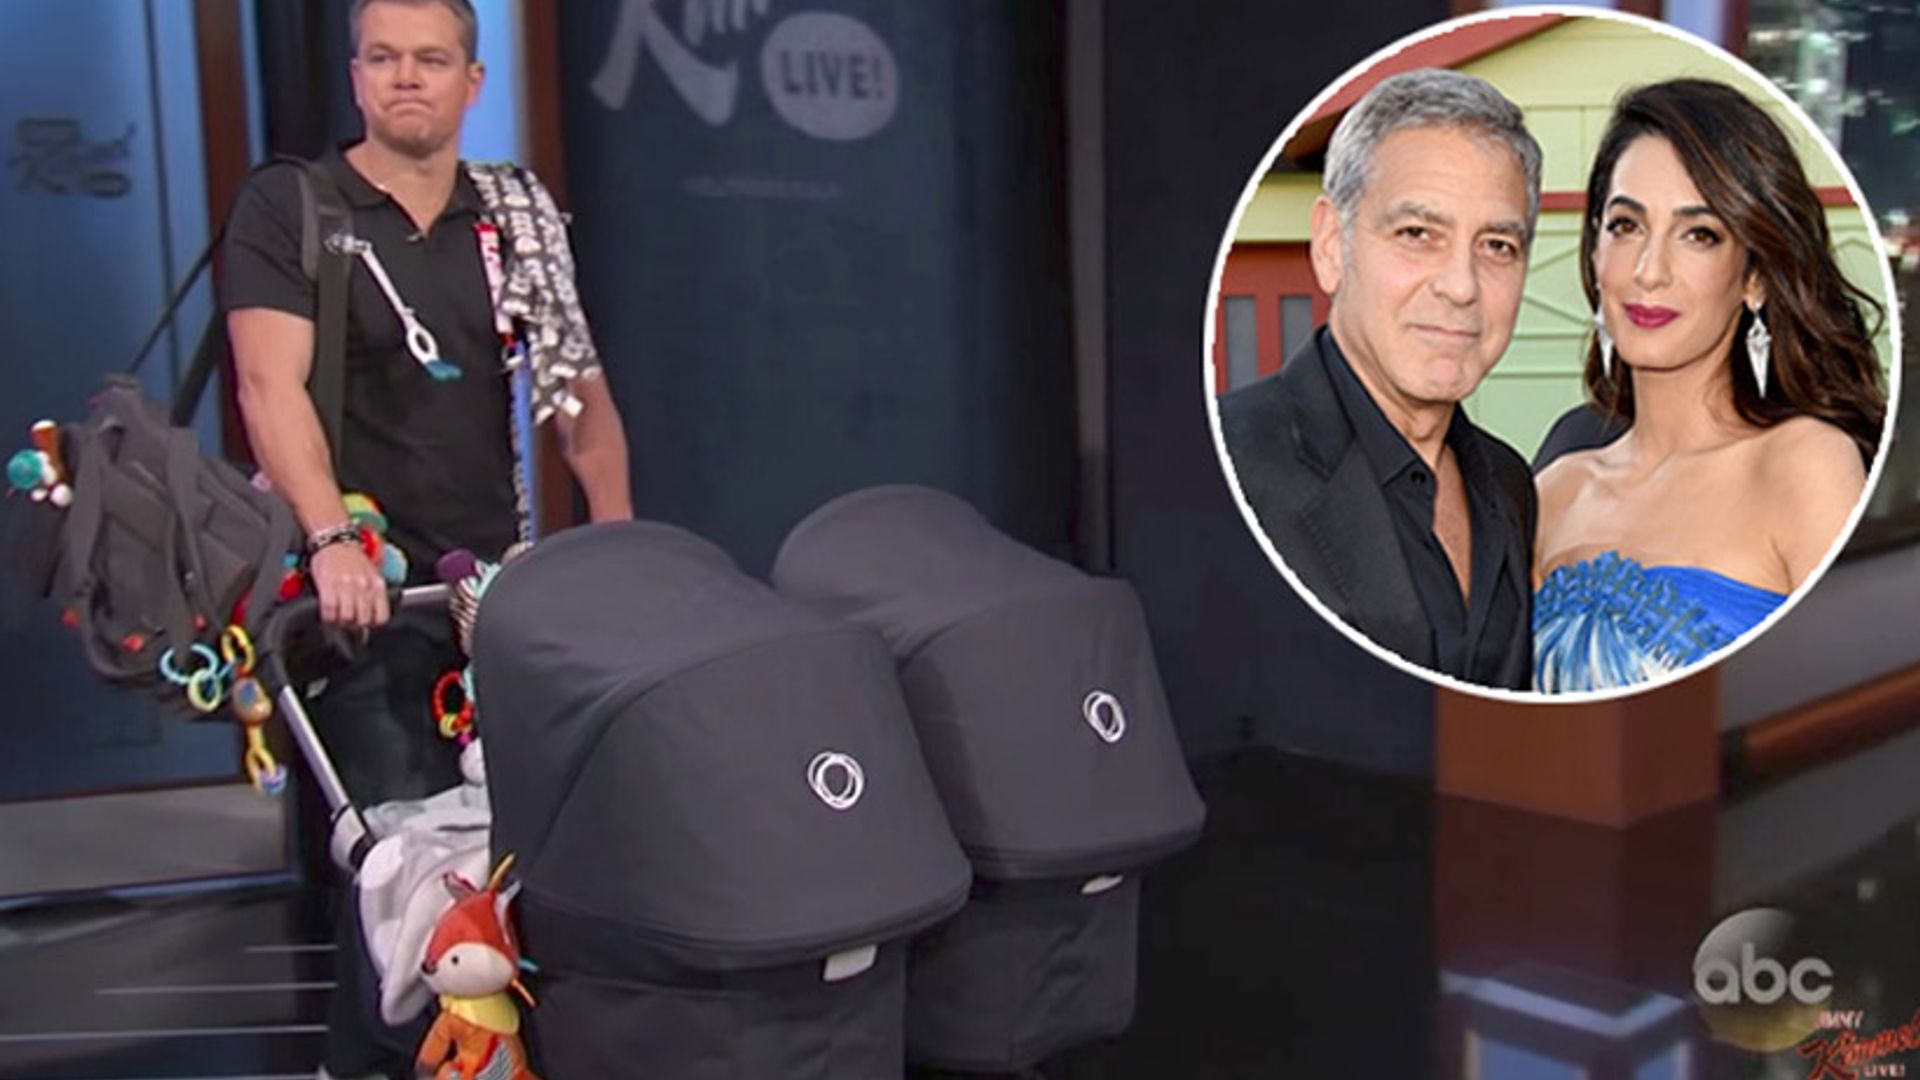 George Clooney's twins make TV debut with their 'manny' Matt Damon